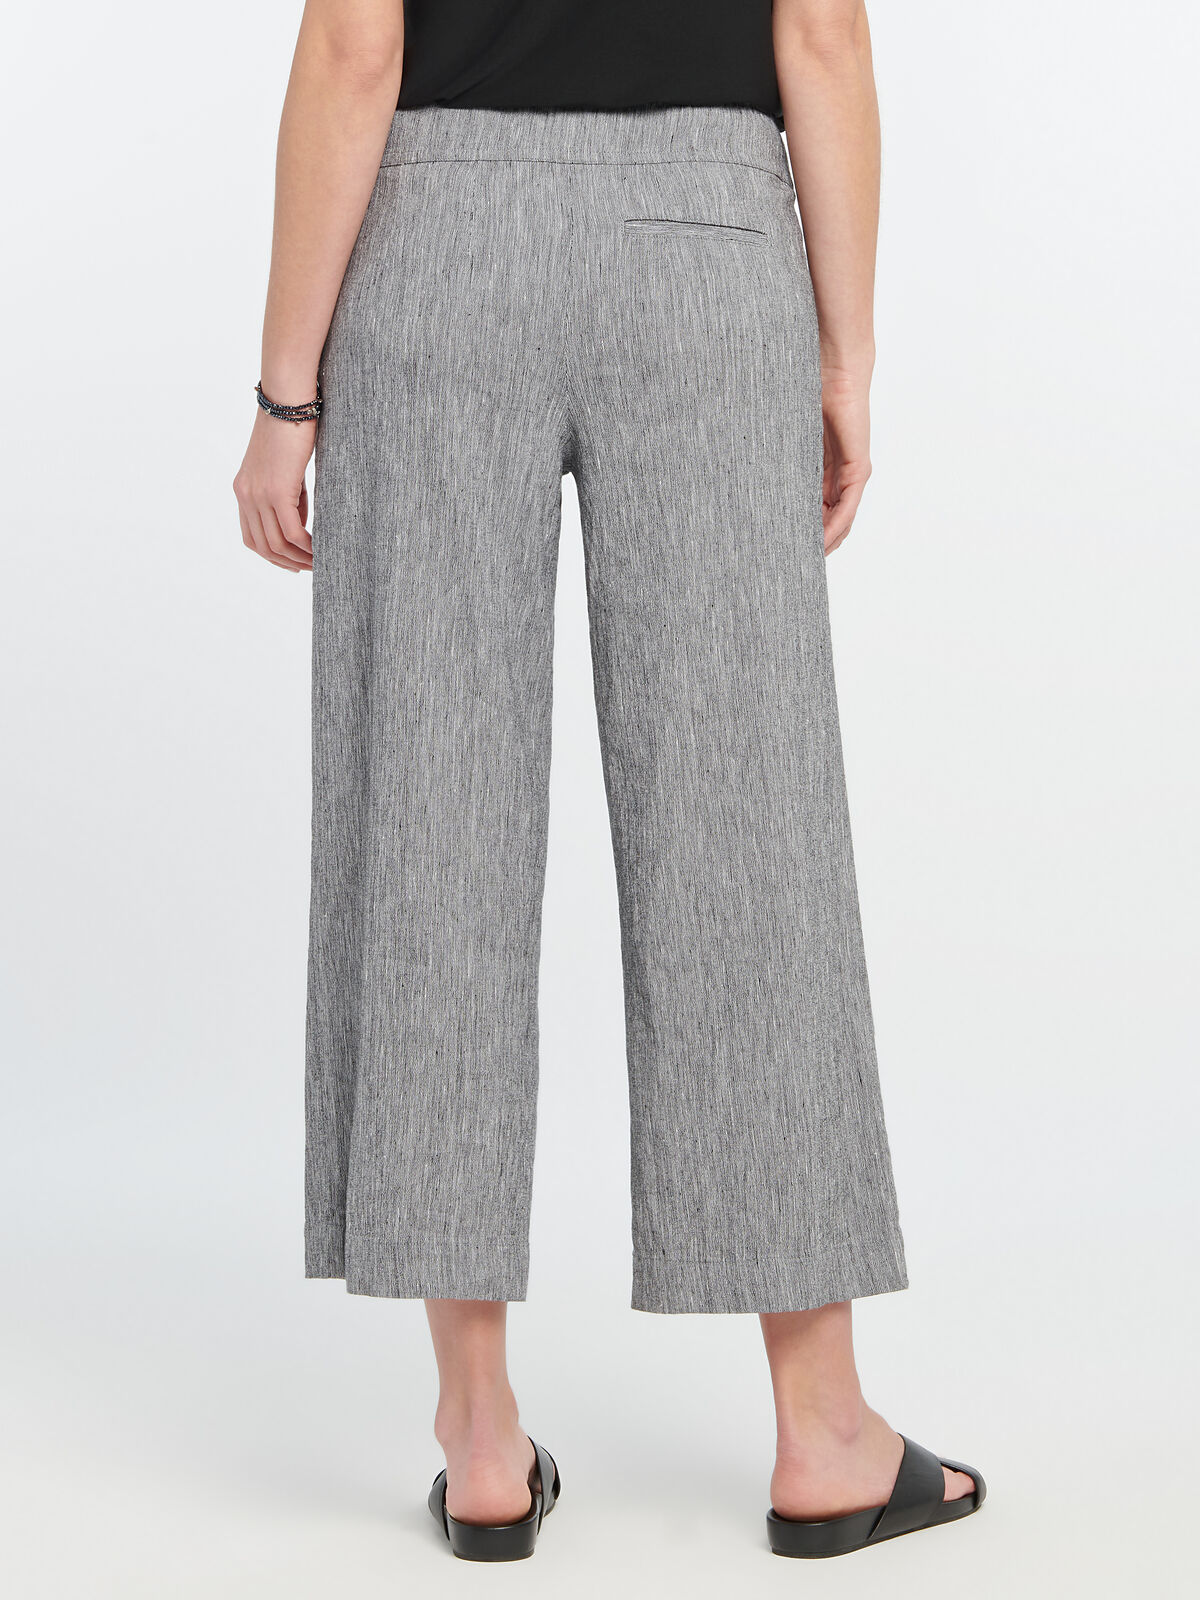 Here Or There Crop Pant | NIC+ZOE